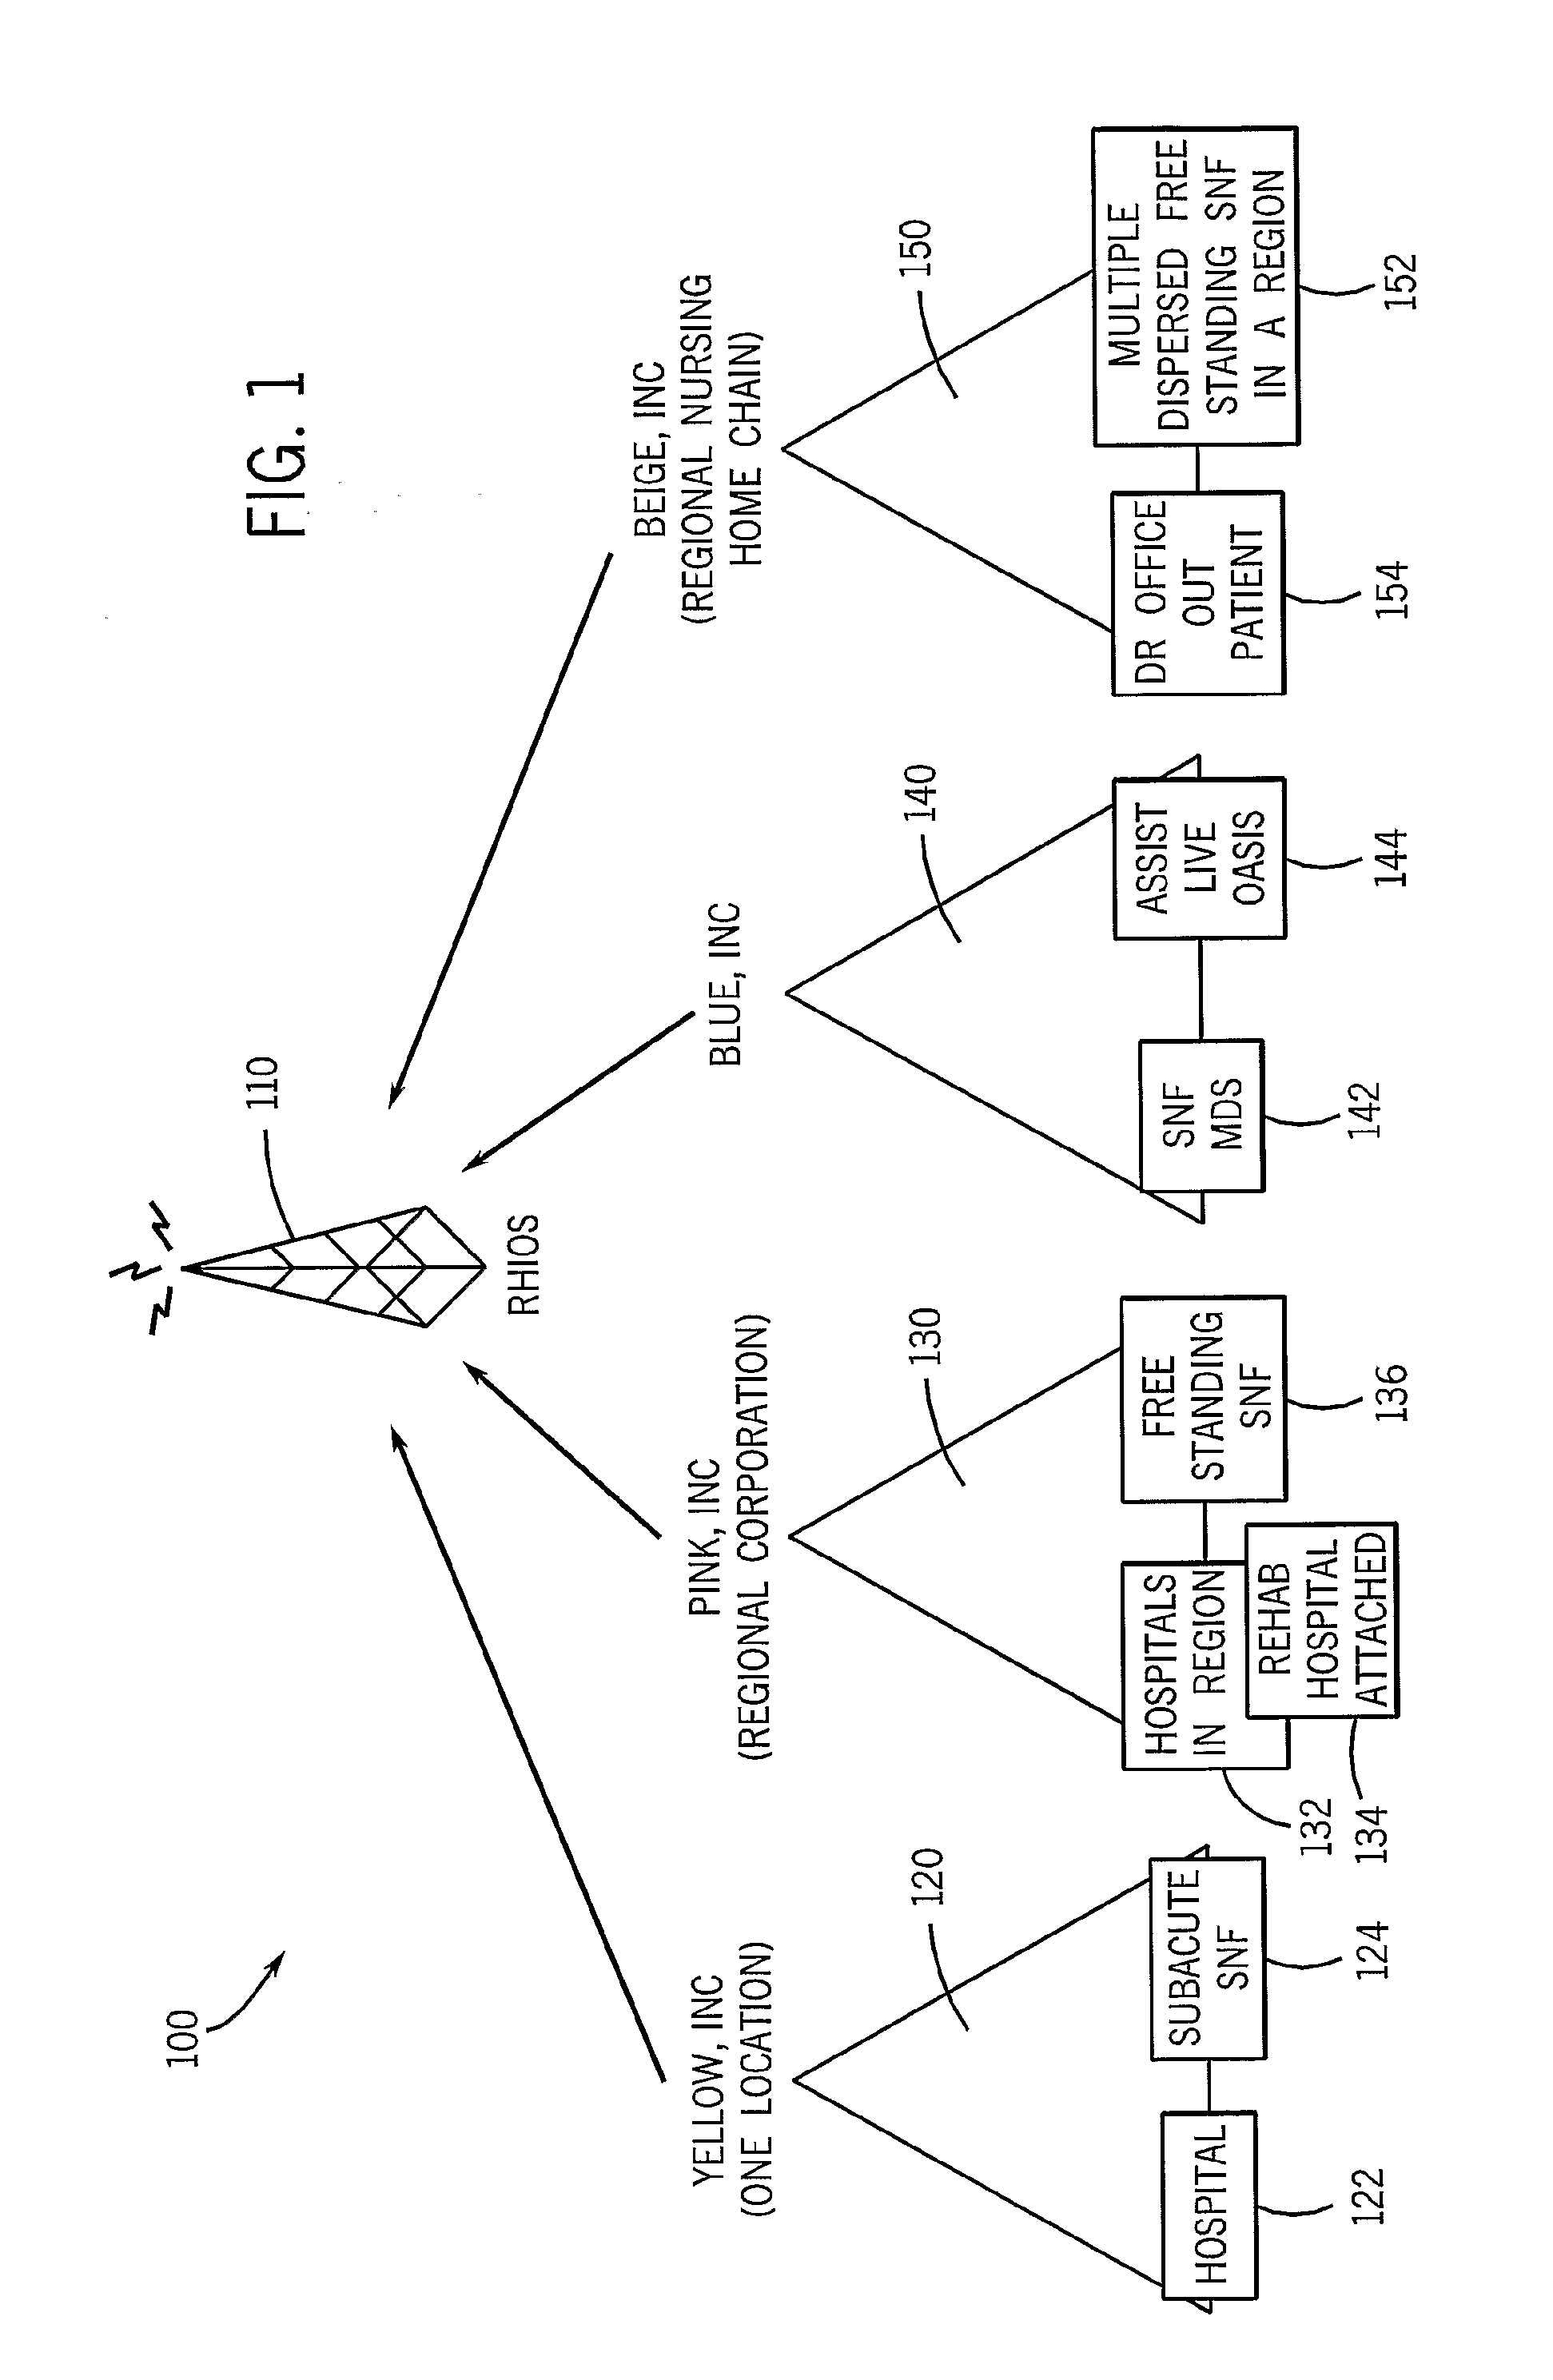 Data collection and data management system and method for use in health delivery settings